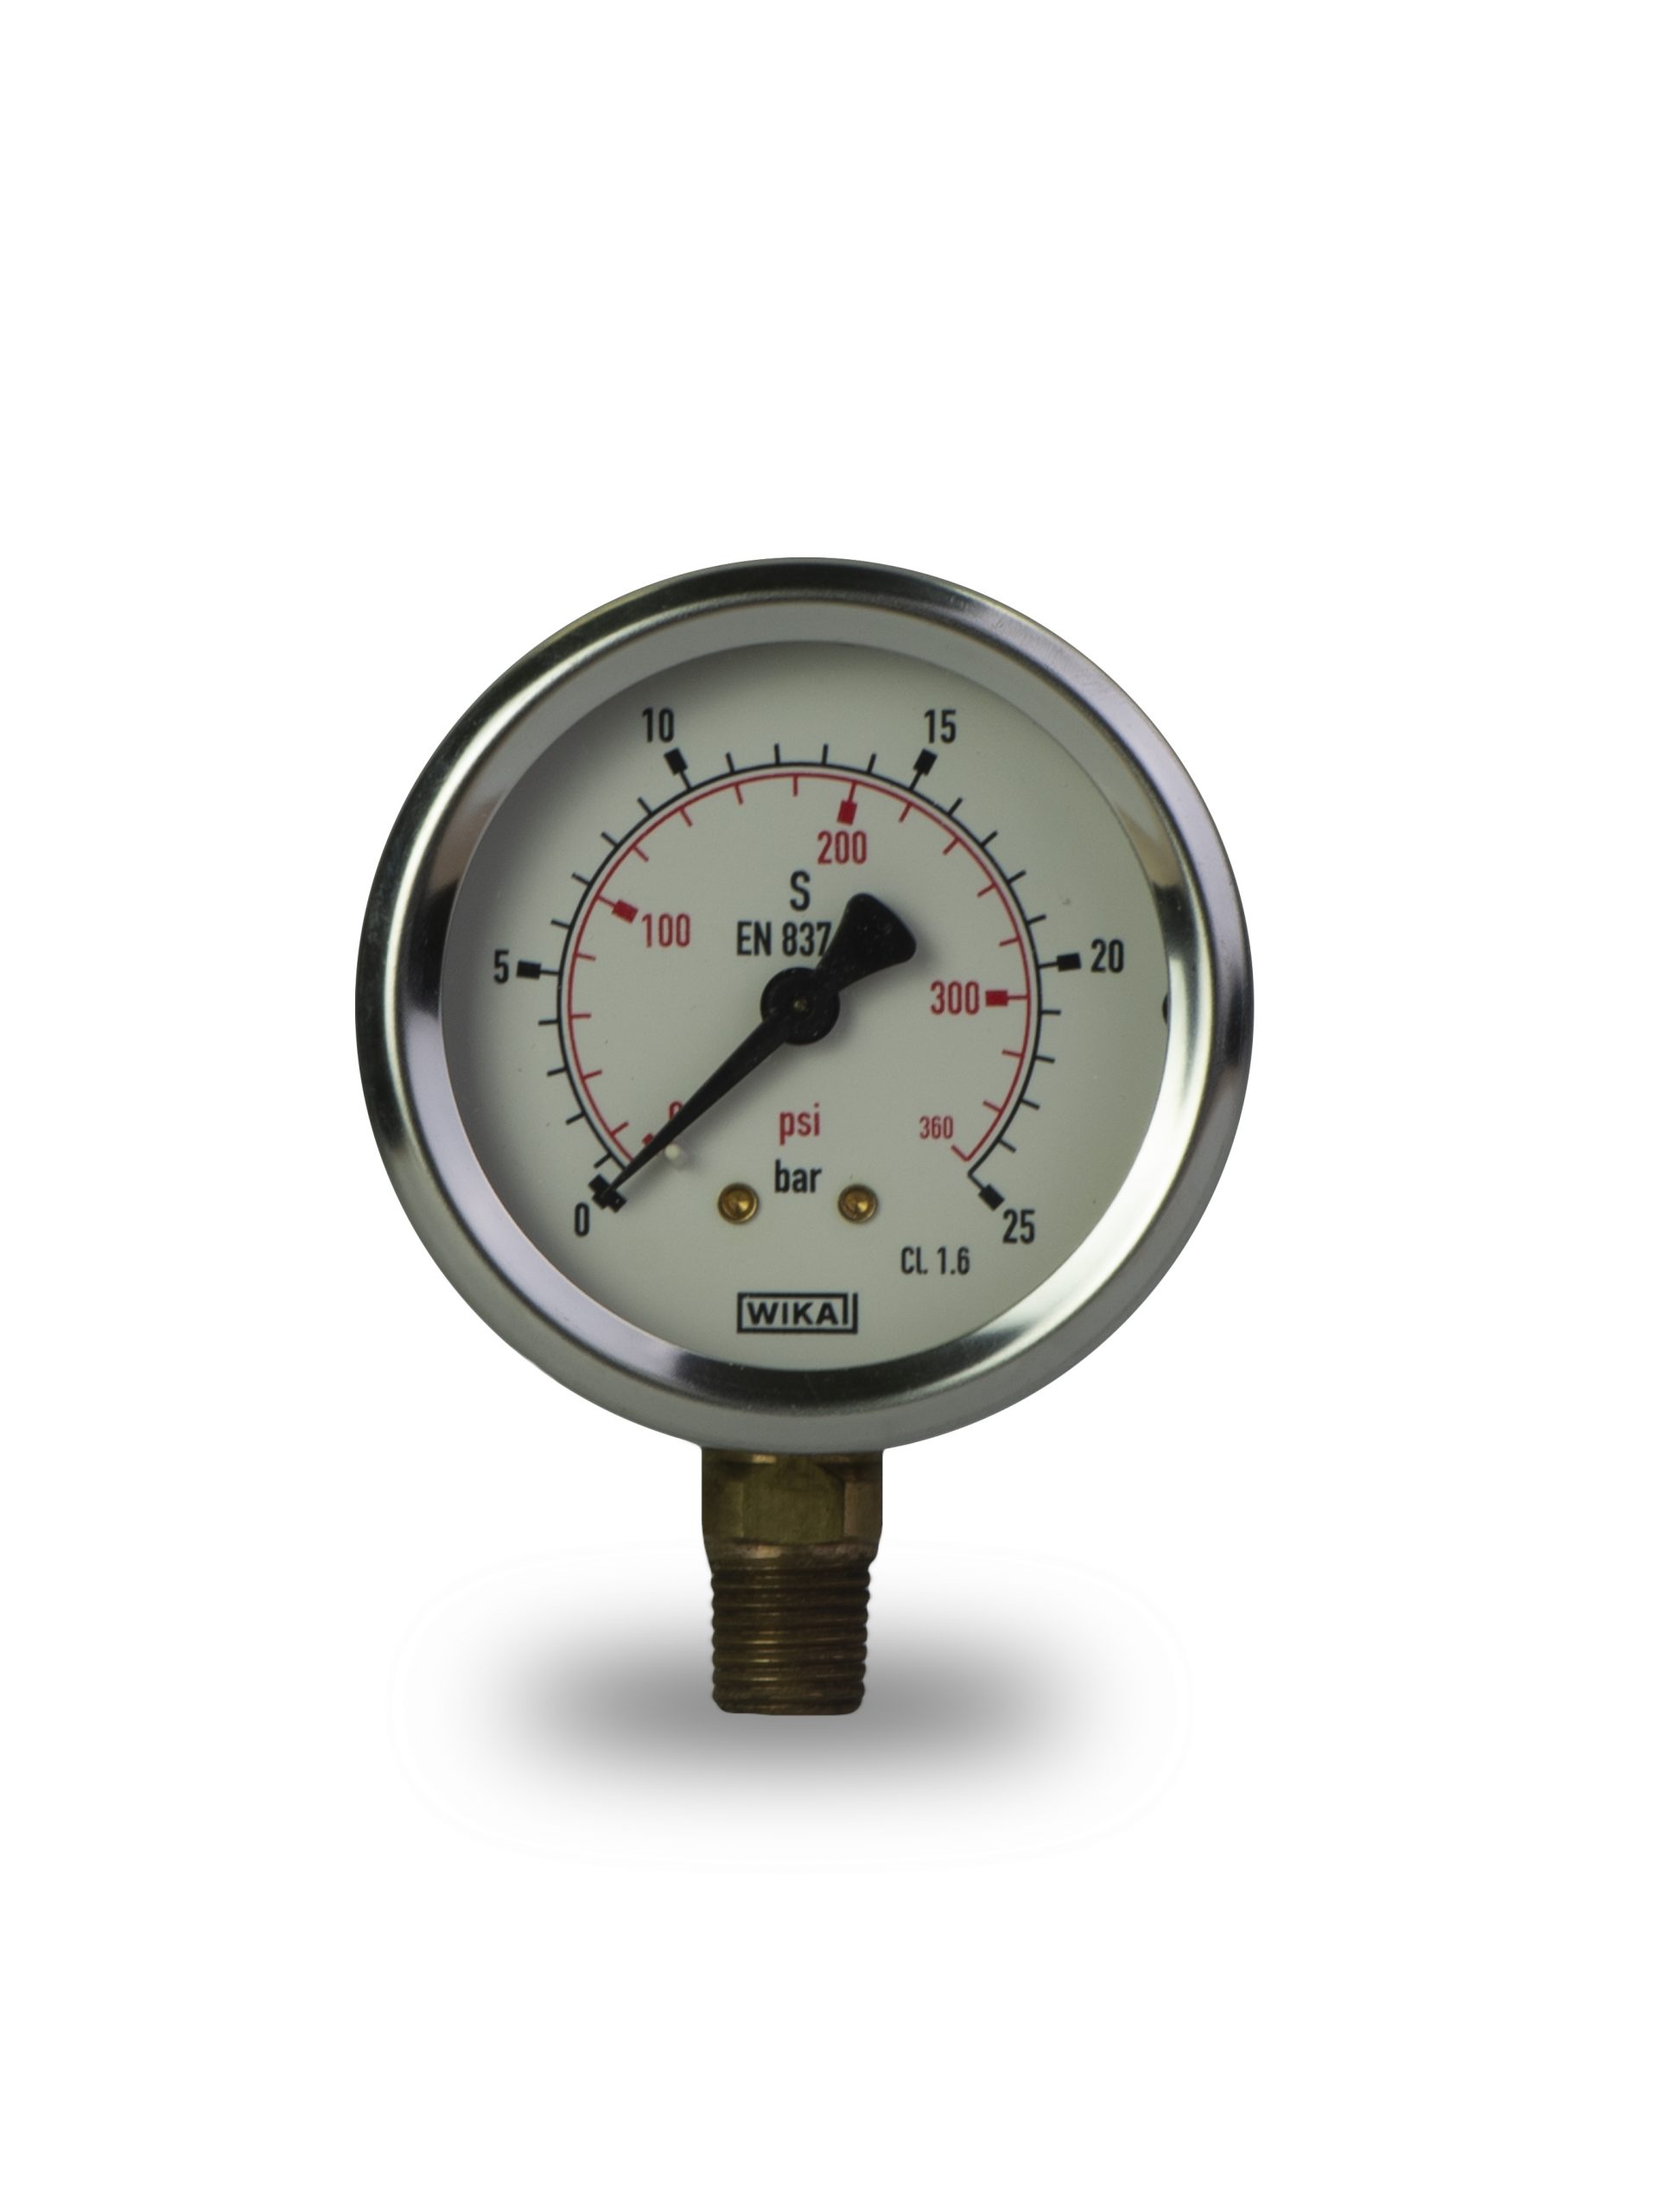 PRESSURE GAUGE  25 BAR DIAMETER 2 1/2 Inches CONNECTION 1/4 Inches , WIKA from Gas Equipment Company Llc Abu Dhabi, UNITED ARAB EMIRATES